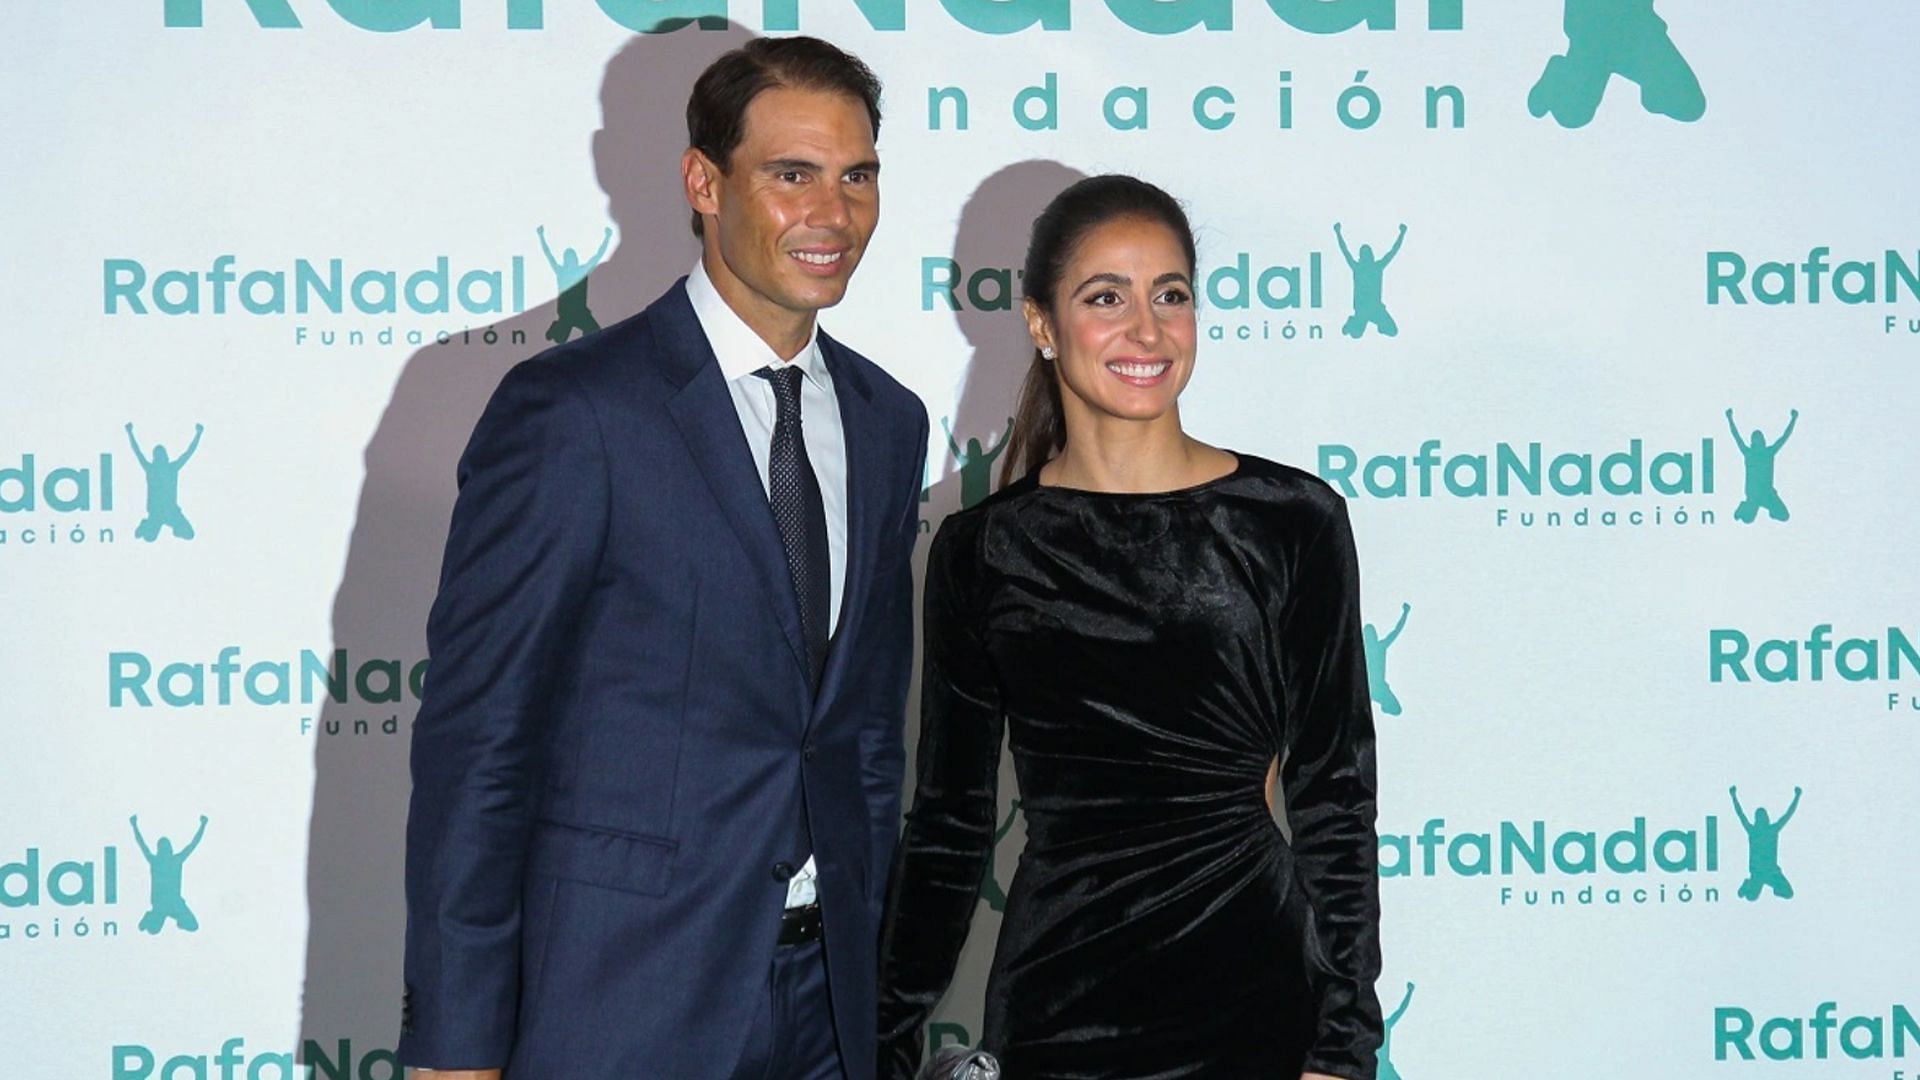 Rafael Nadal launches new fragrance line with his wife 